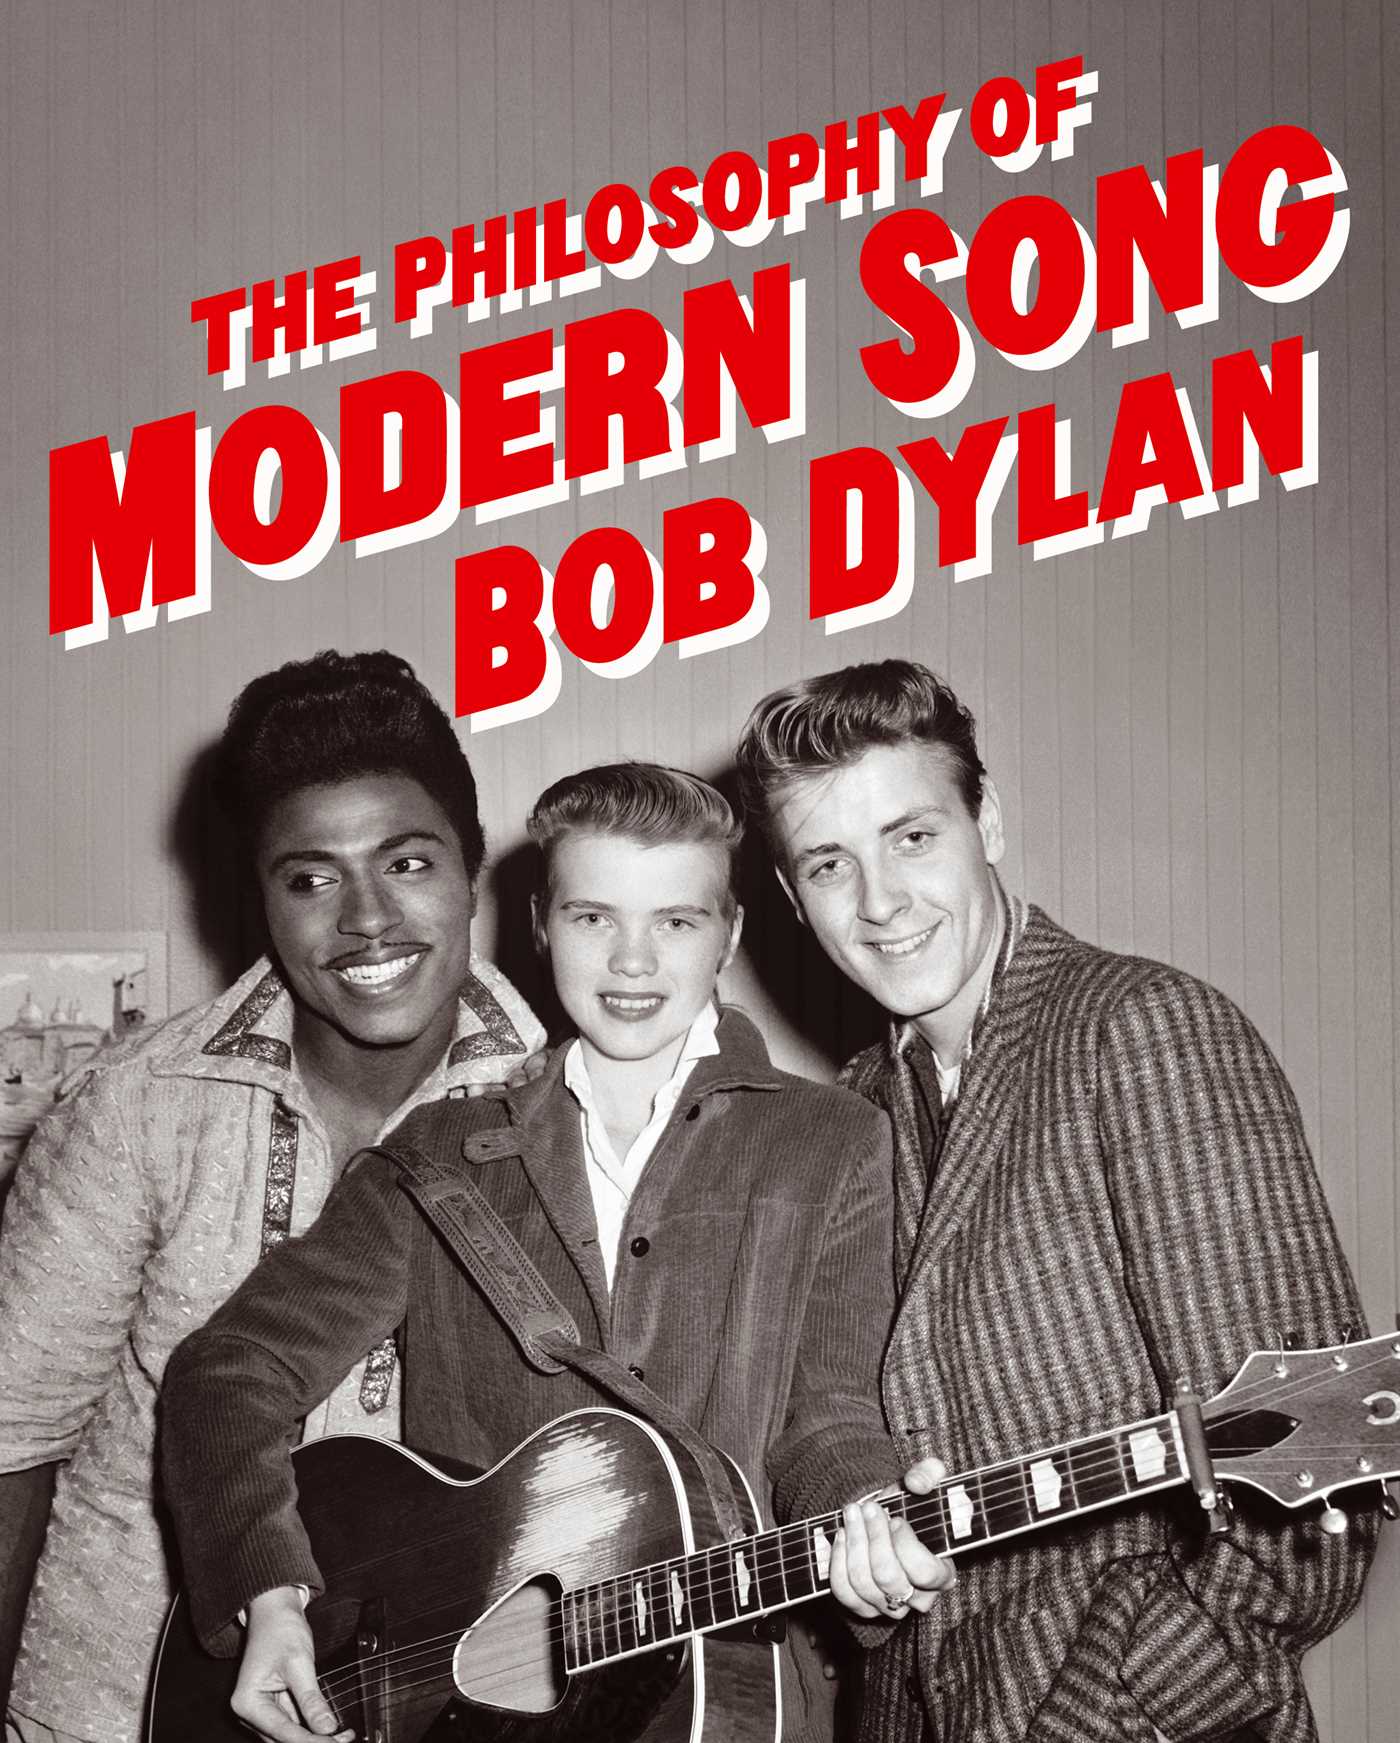 The Philosophy of Modern Song by Bob Dylan PDF Download